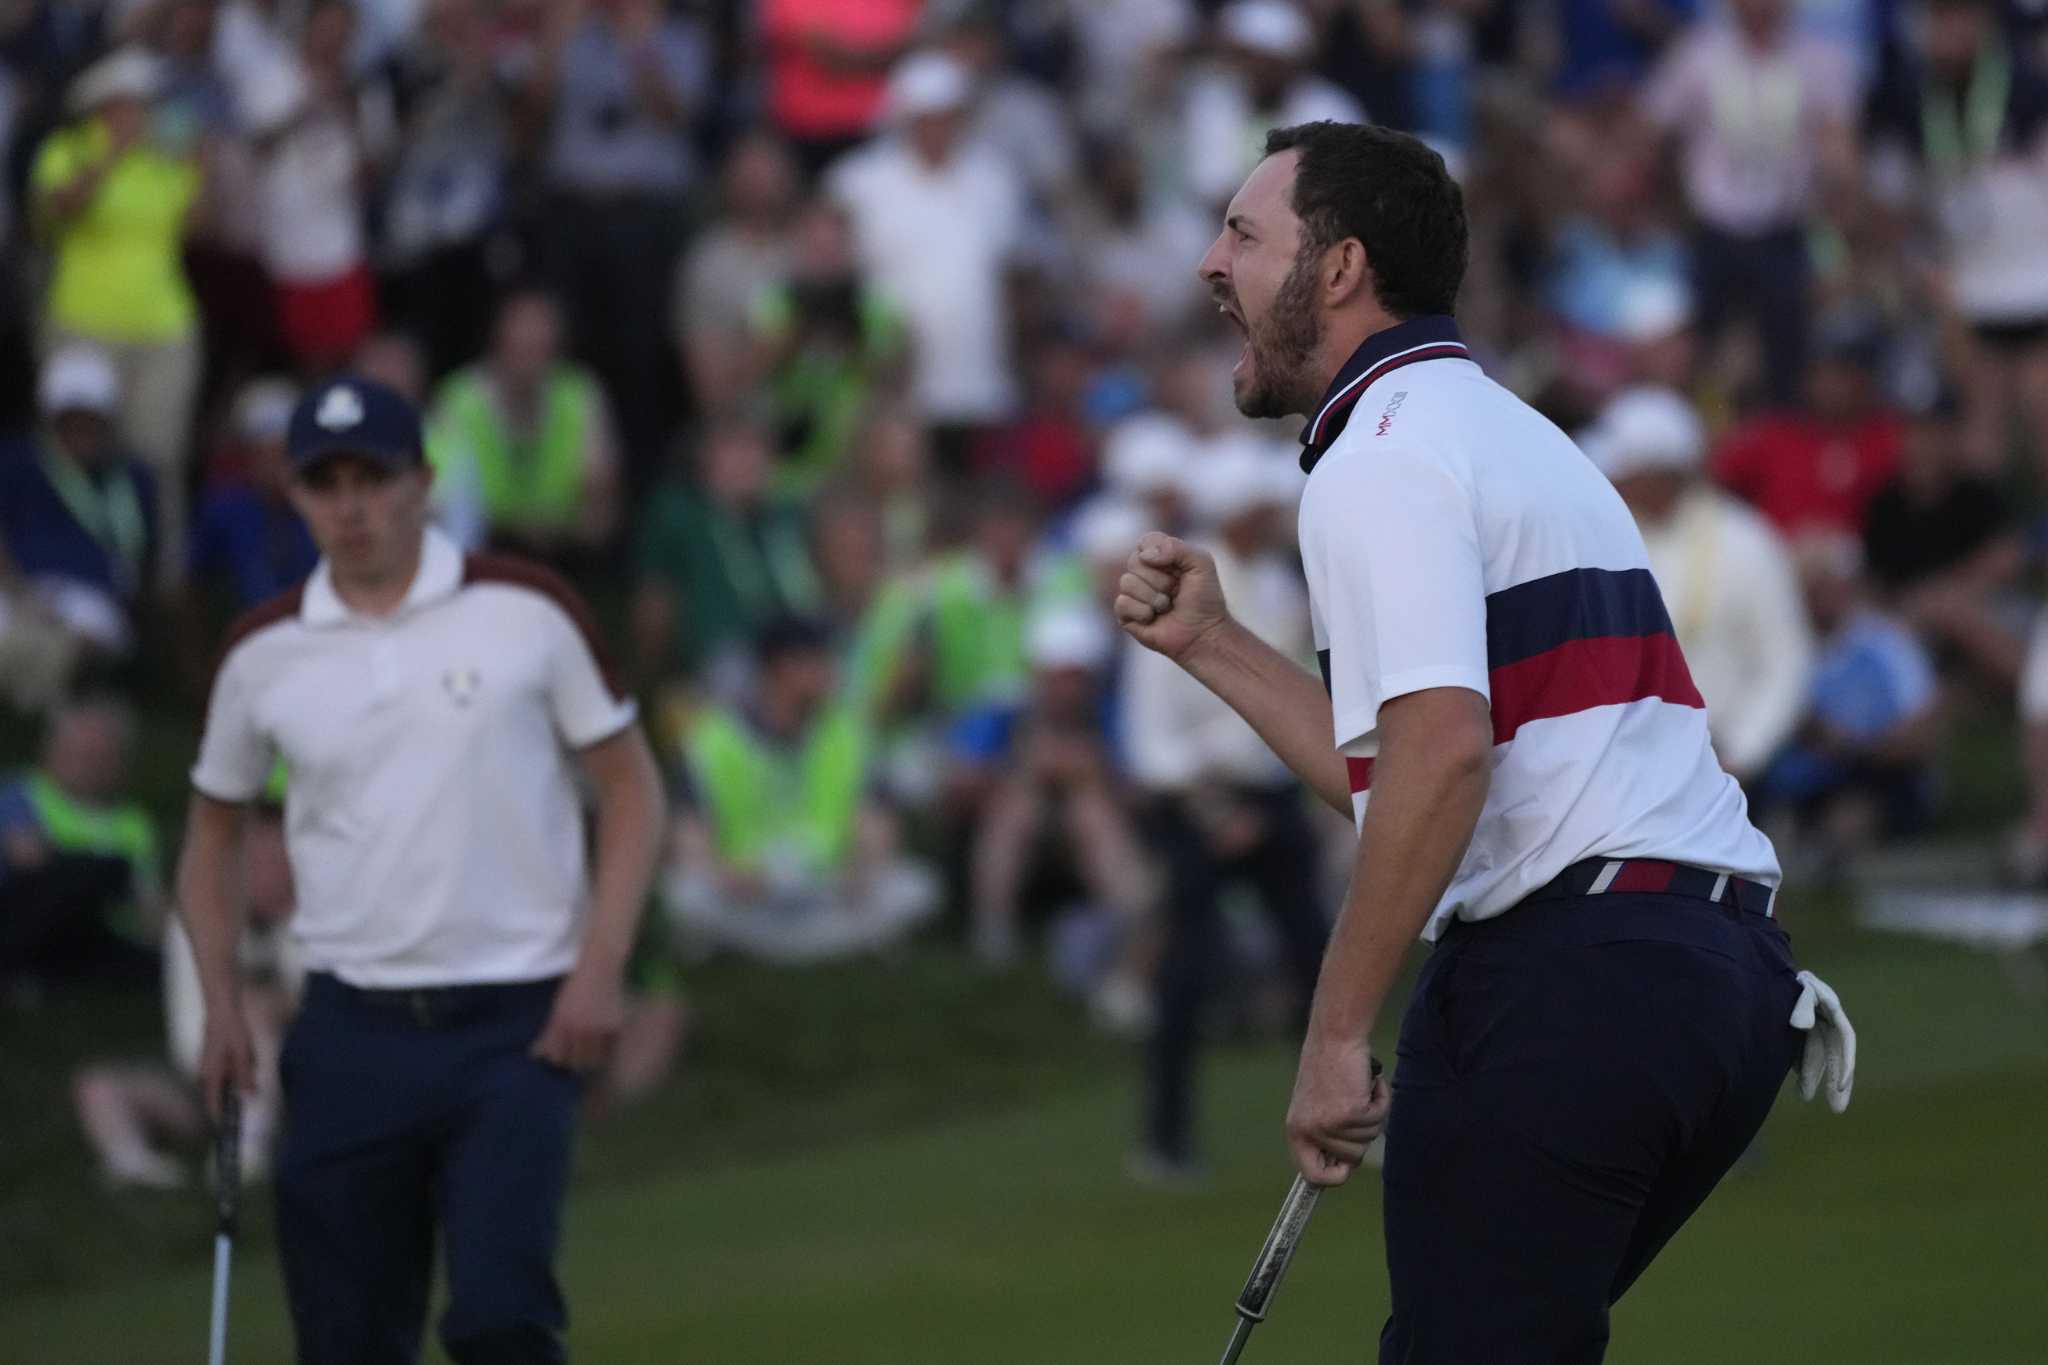 Patrick Cantlay sparks 4ball win as U.S. finds hope at Ryder Cup